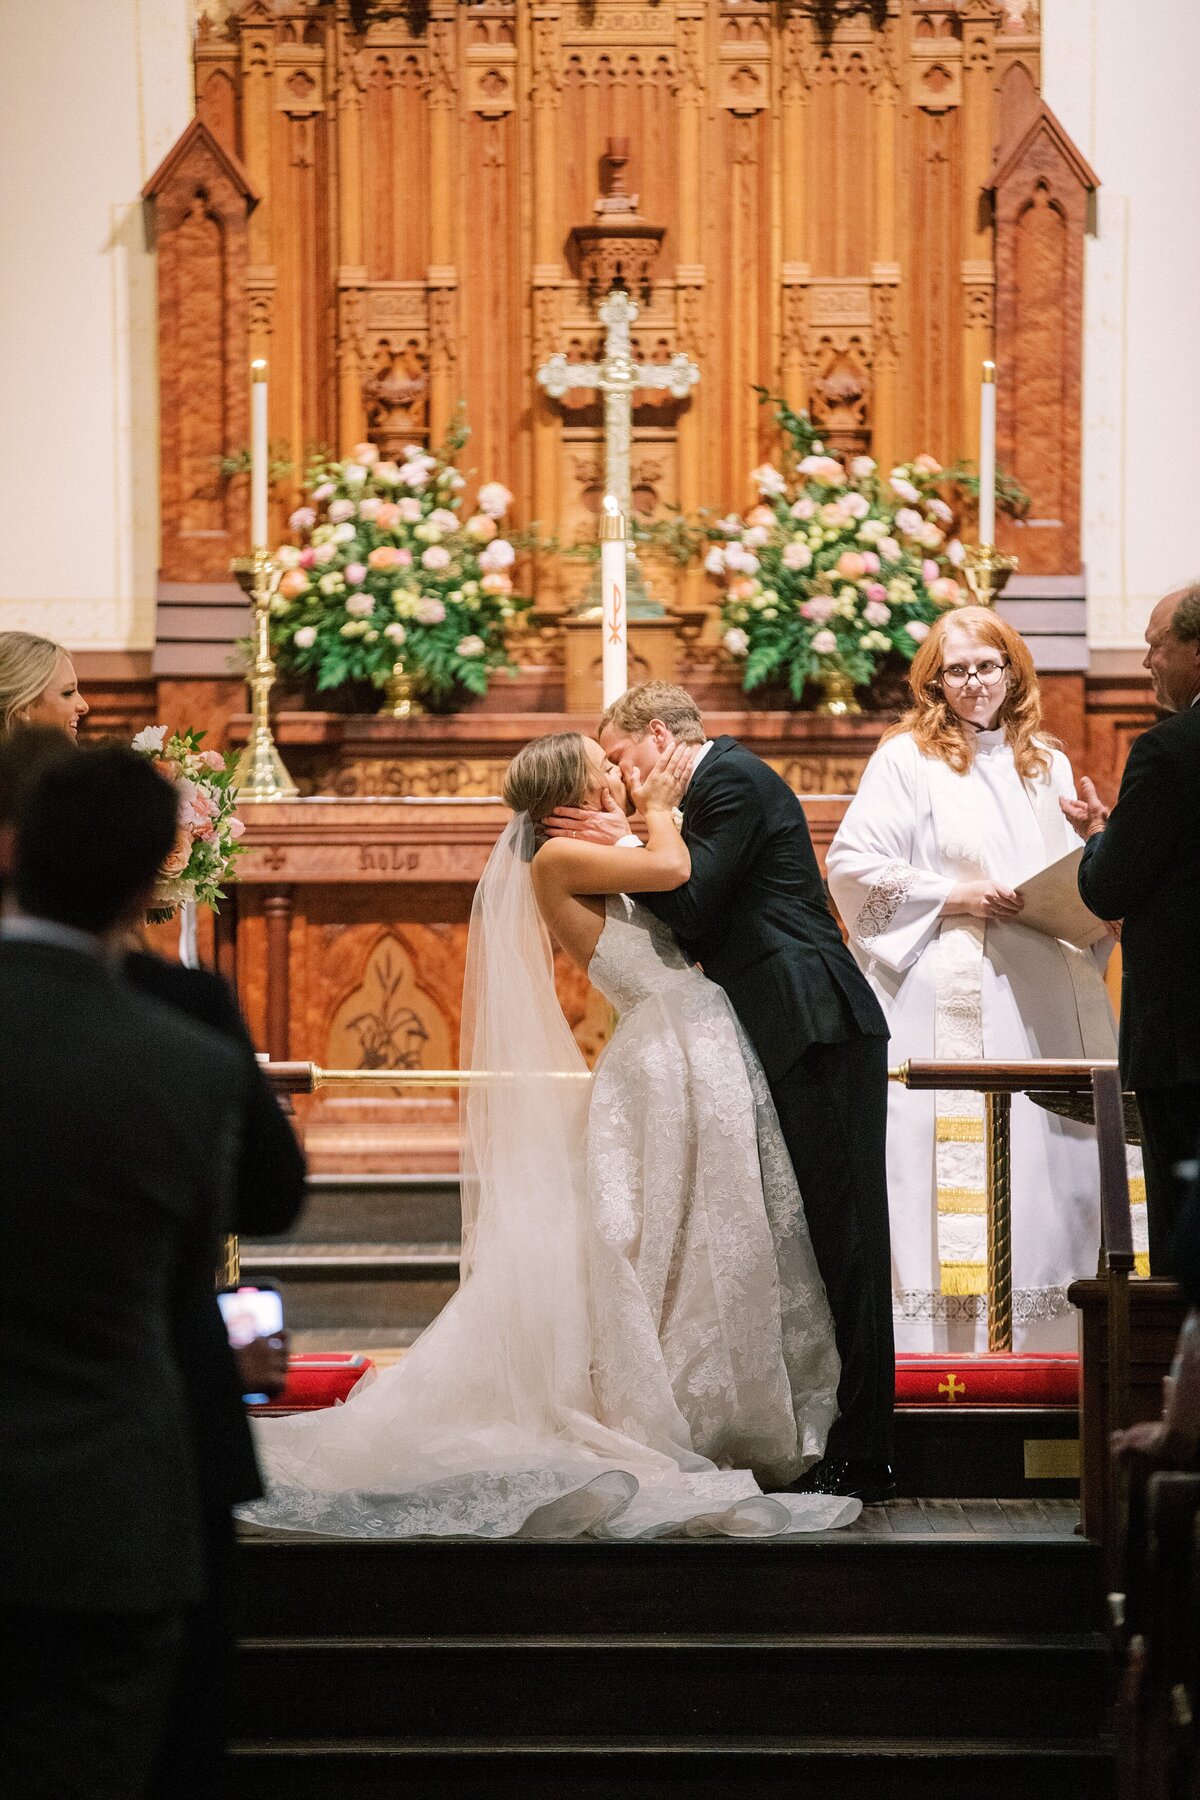 A wedding ceremony at St. John's Episcopal Church in Tallahassee, FL - 3